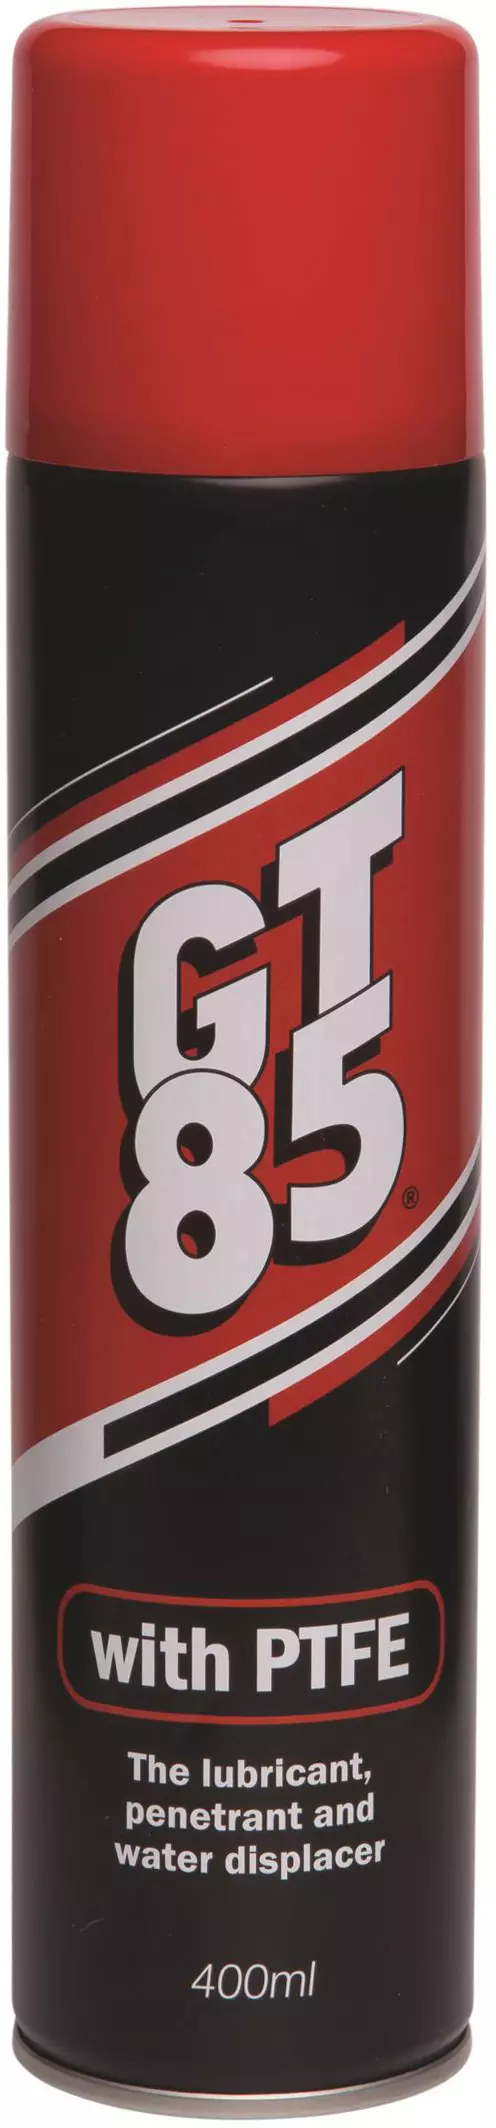 gt85 chain lube